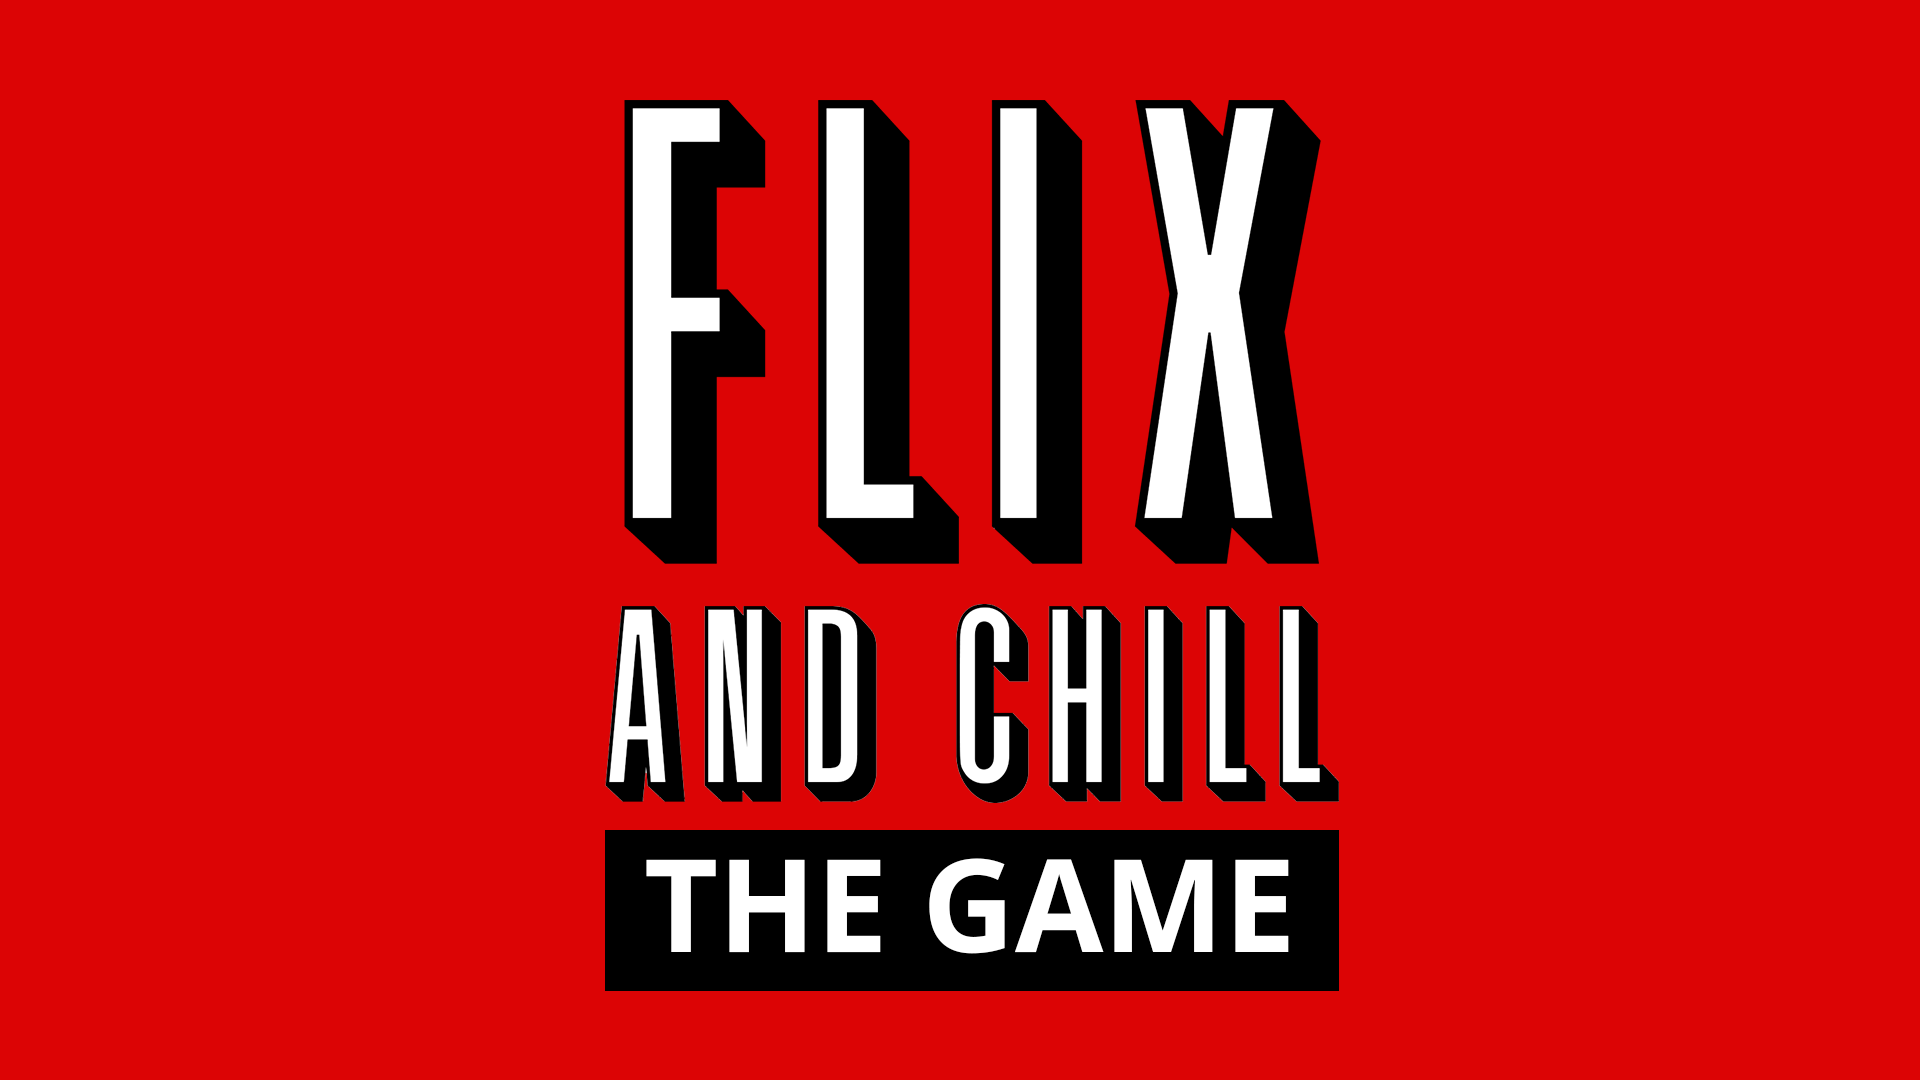 Z flix. Flix and Chill. Chill game. Flix inactive. Gaming and Chill картинка.